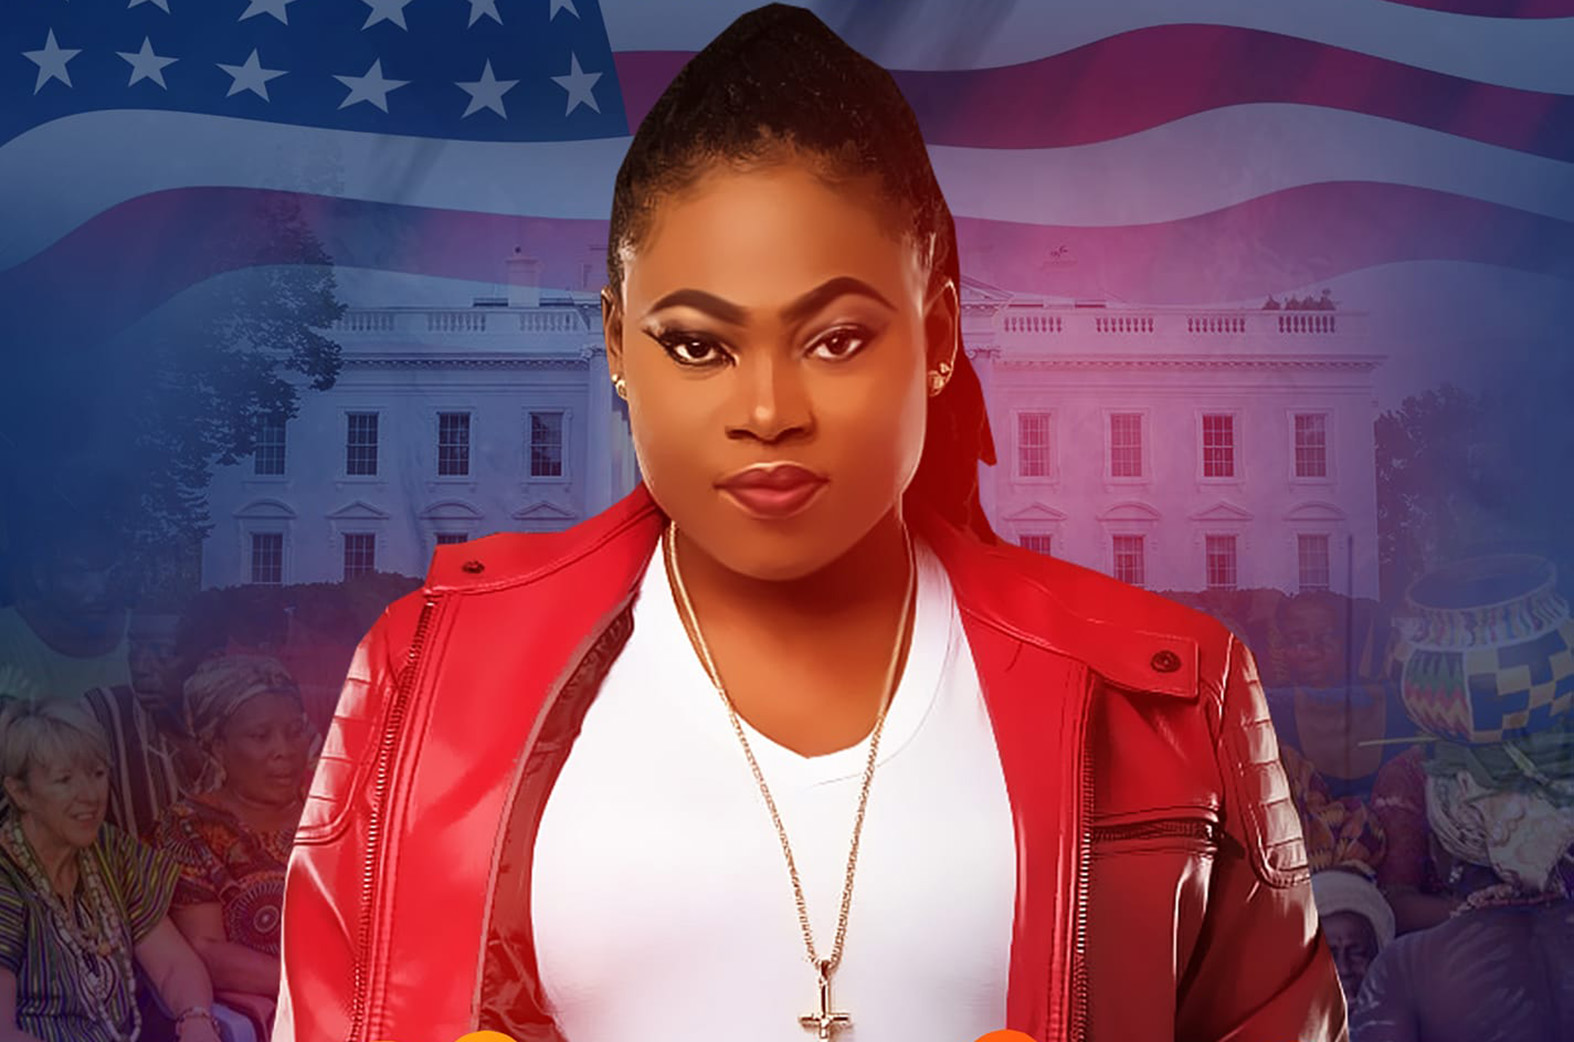 Joyce Blessing to headline GhanaFest event in USA this Saturday